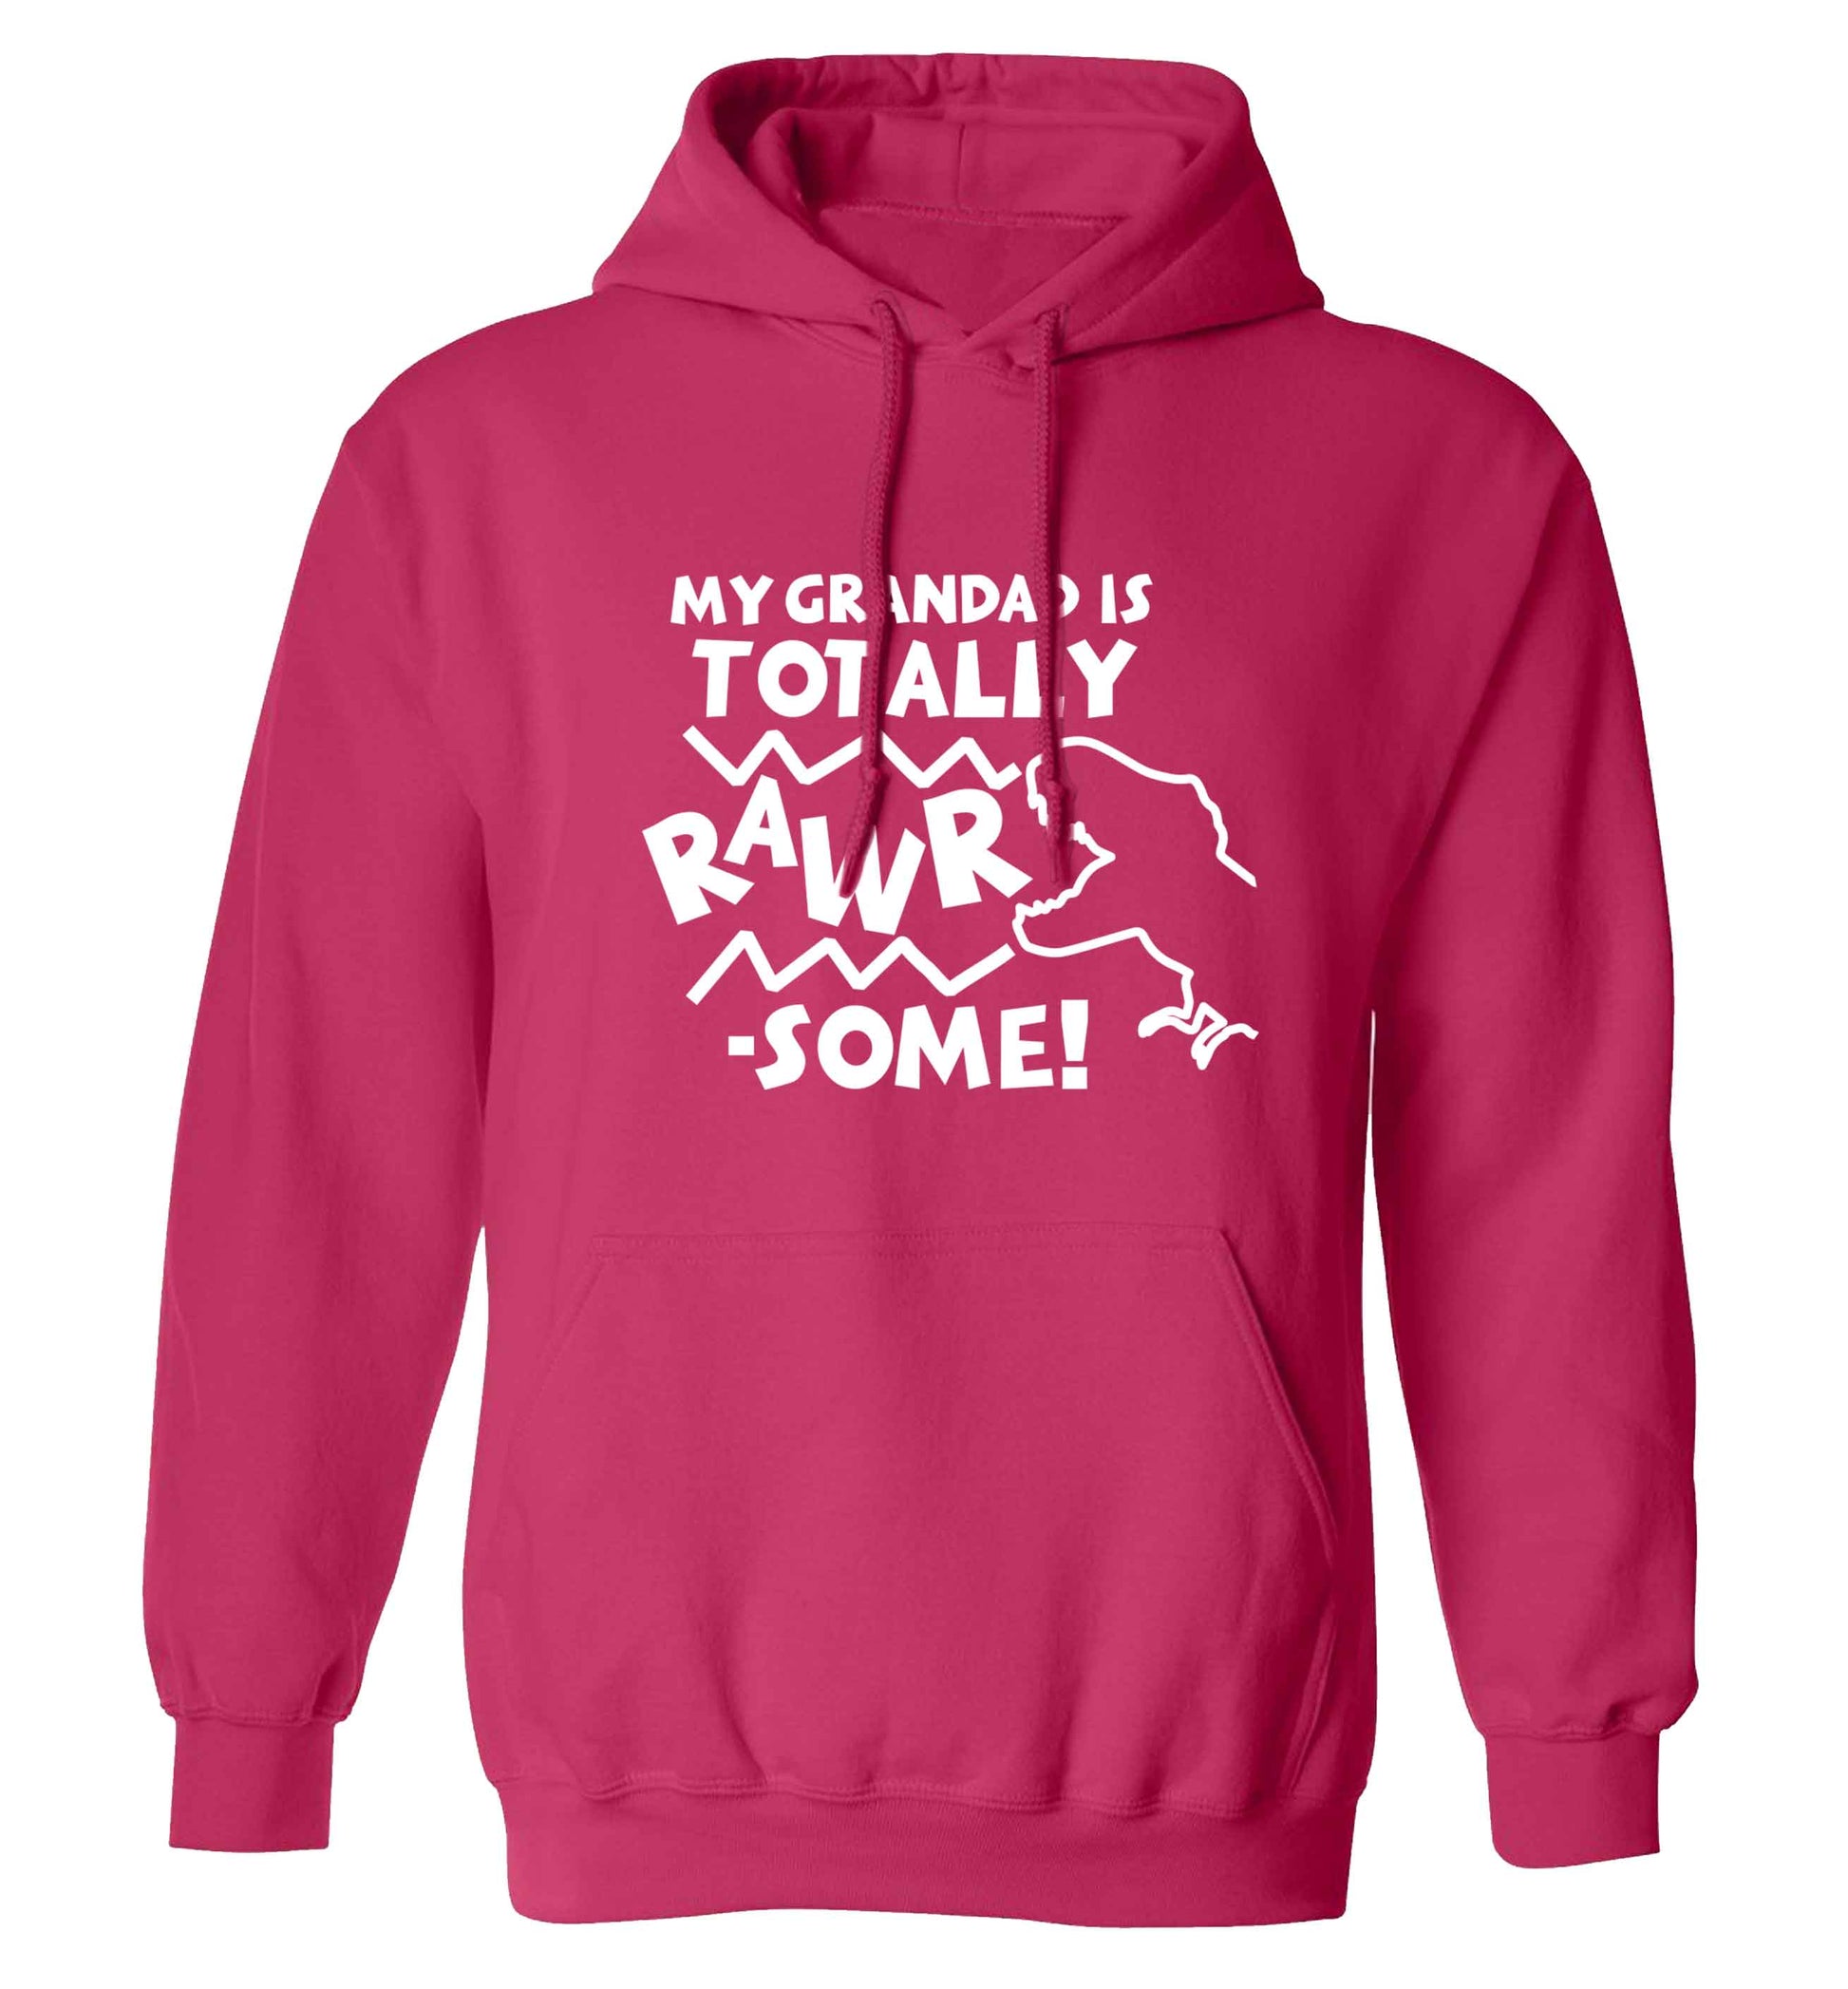 My grandad is totally rawrsome adults unisex pink hoodie 2XL